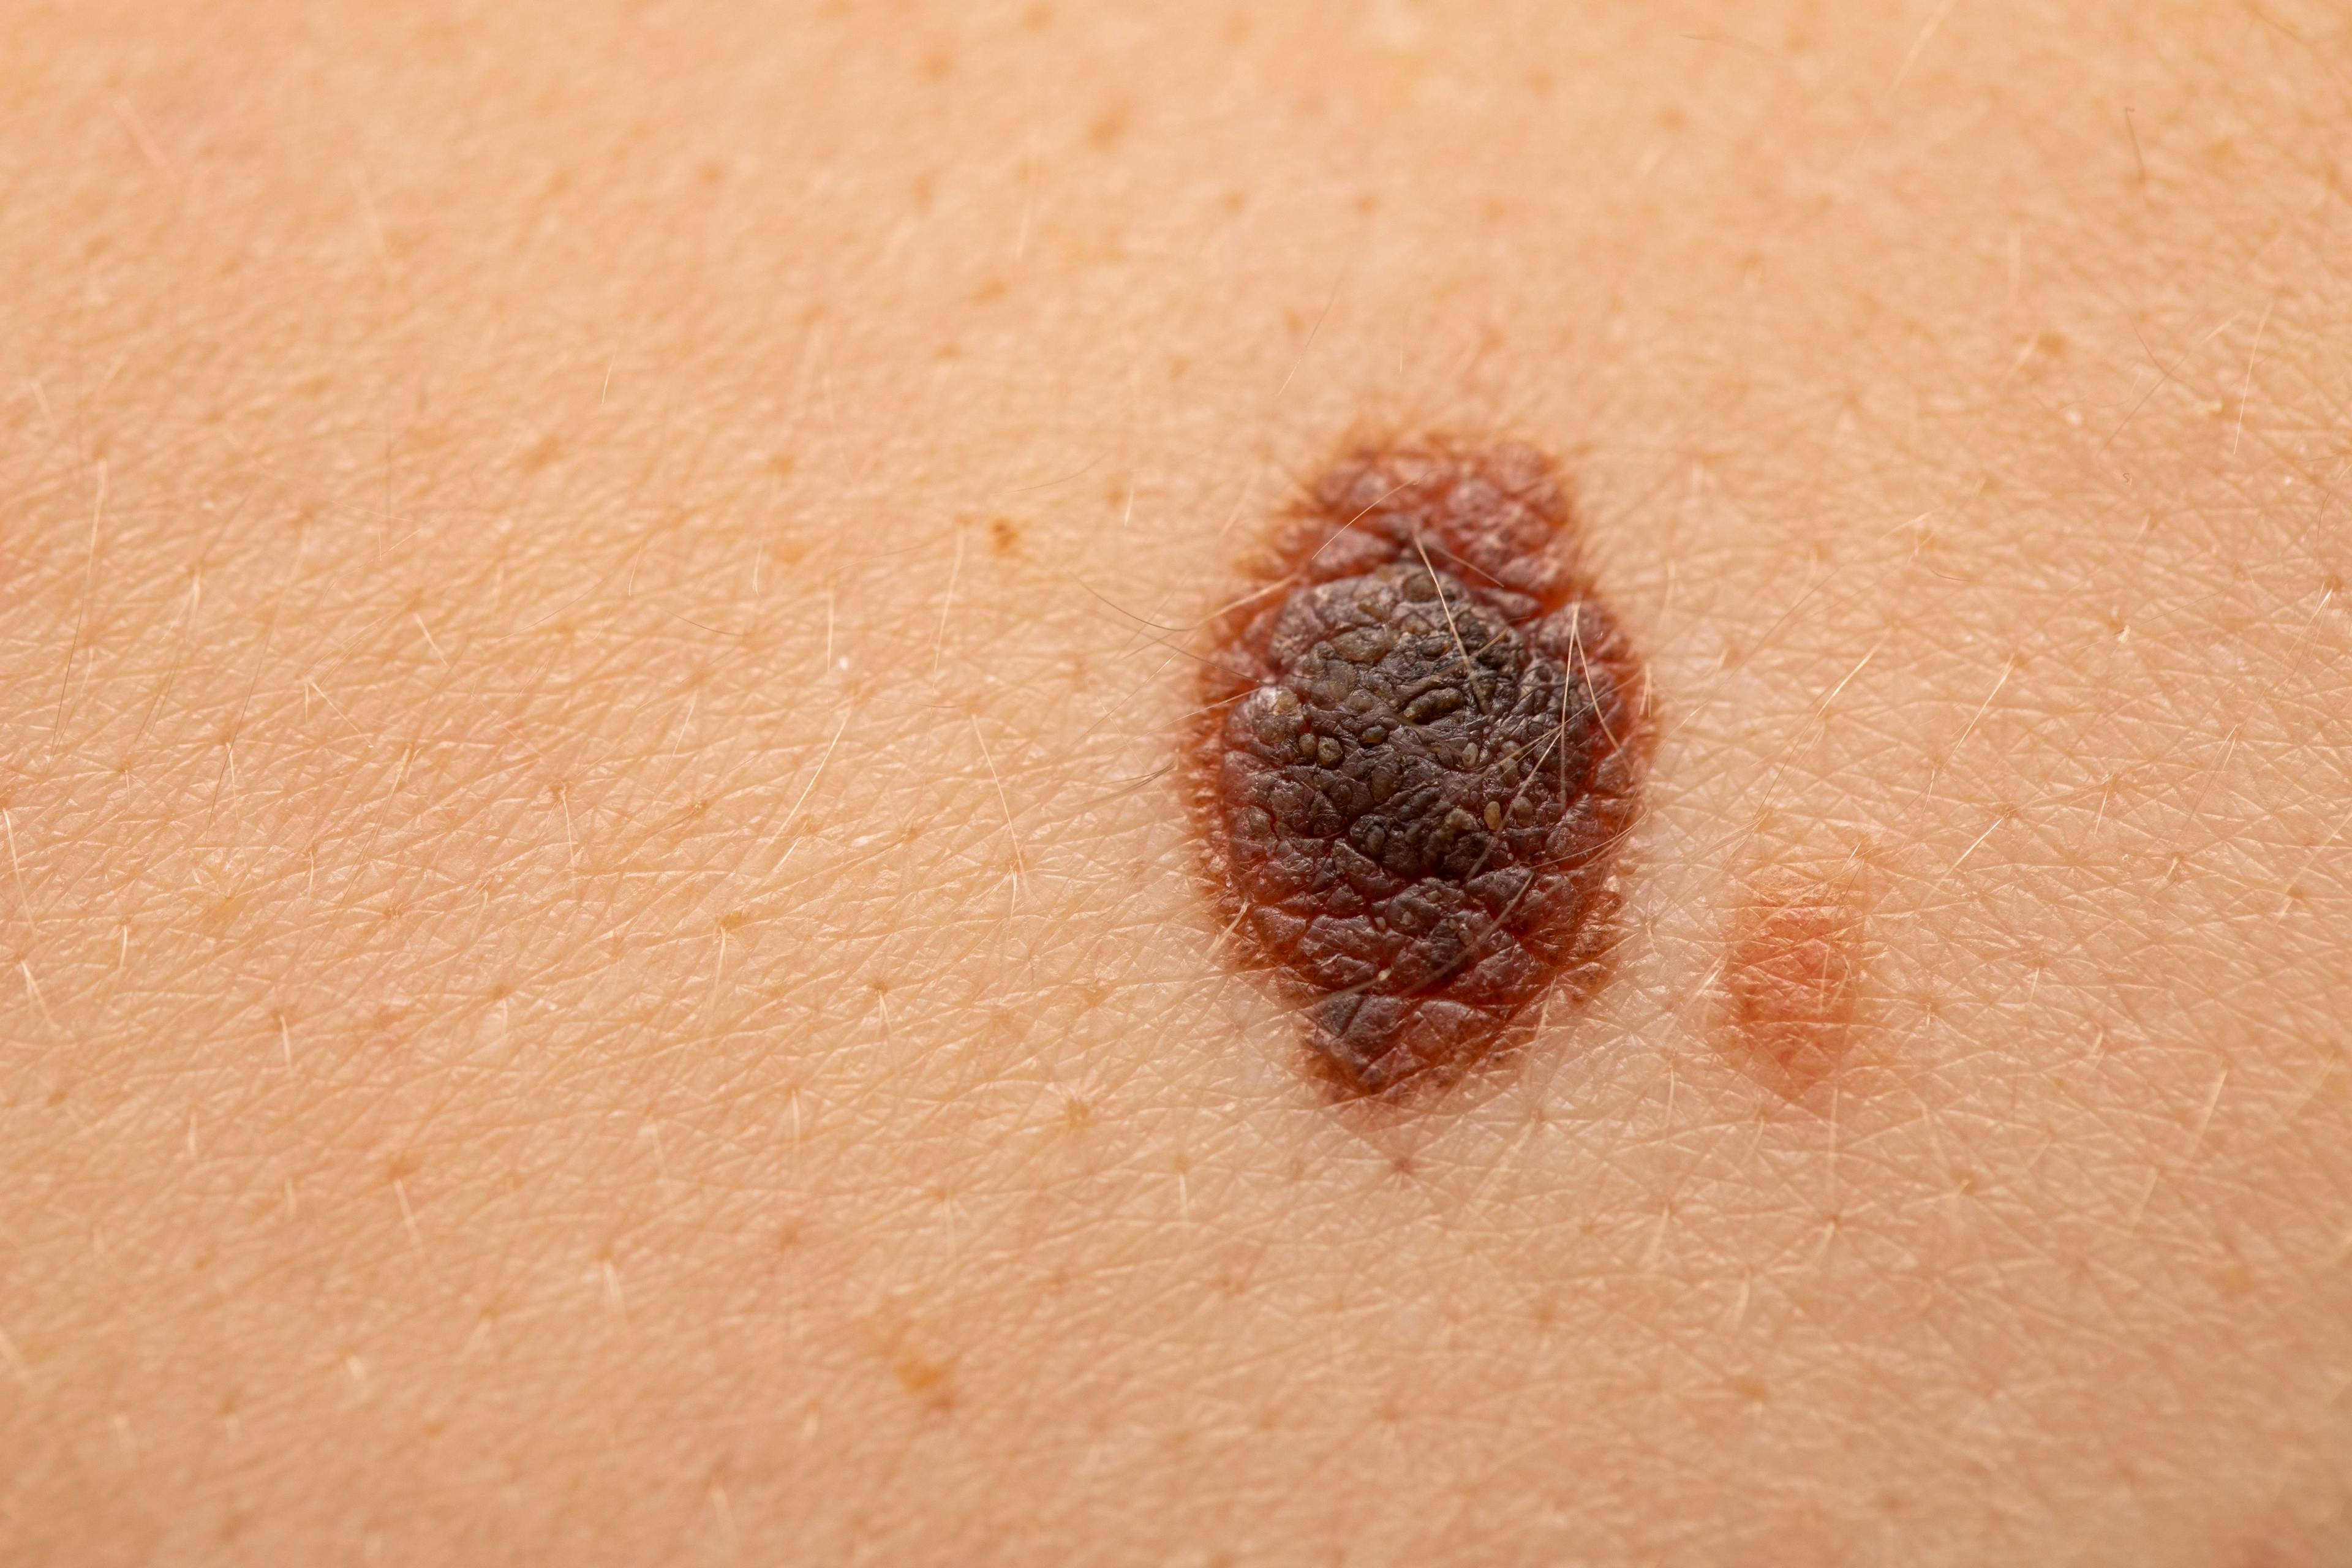 31-Gene Expression Profile Test Accurately Classified Risk of Death From Melanoma